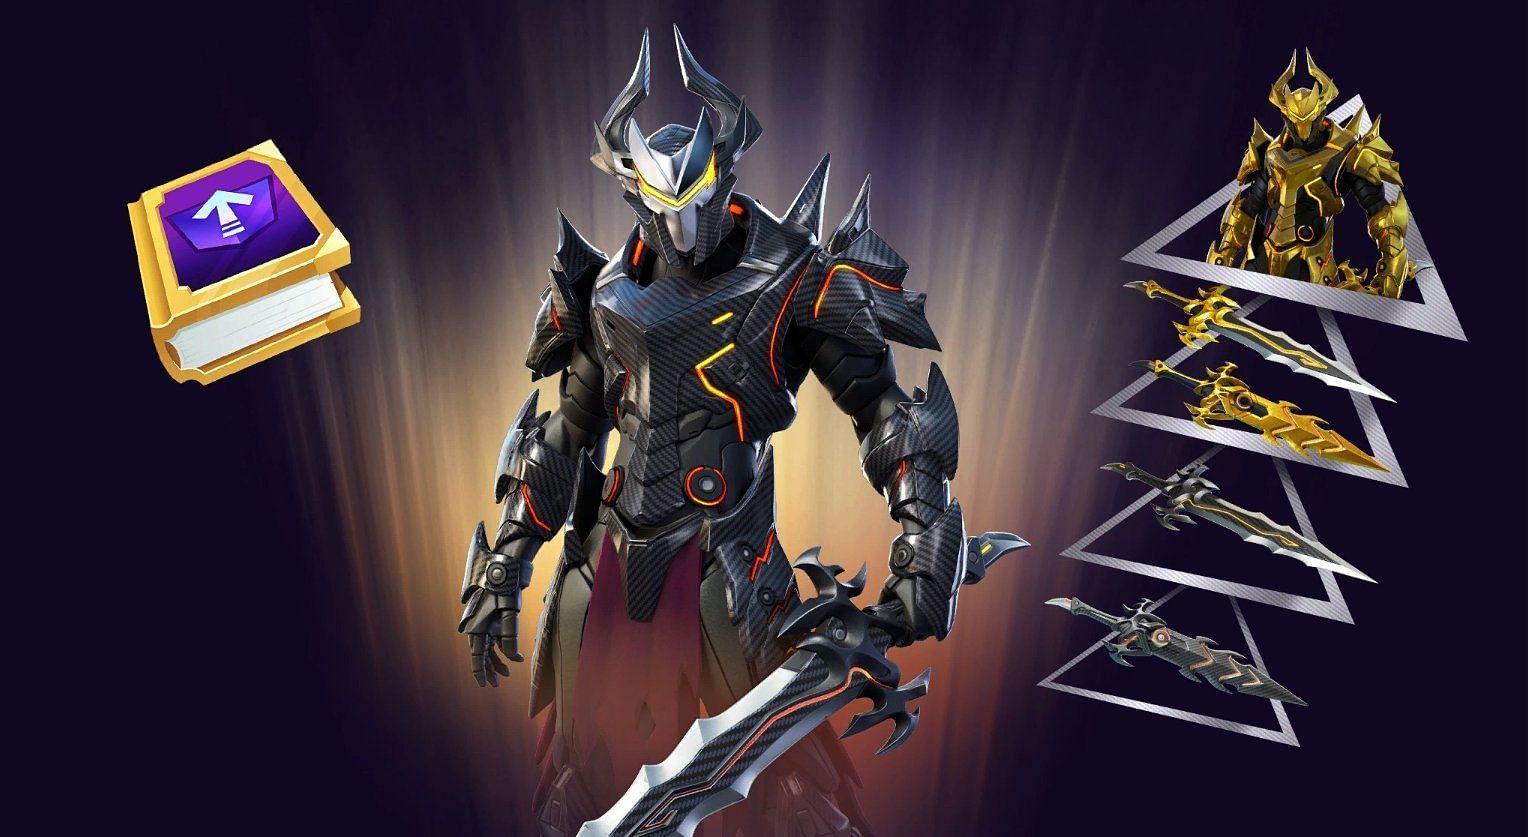 Omega Knight skin in Fortnite and its upgrades (Image via HYPEX/Twitter)